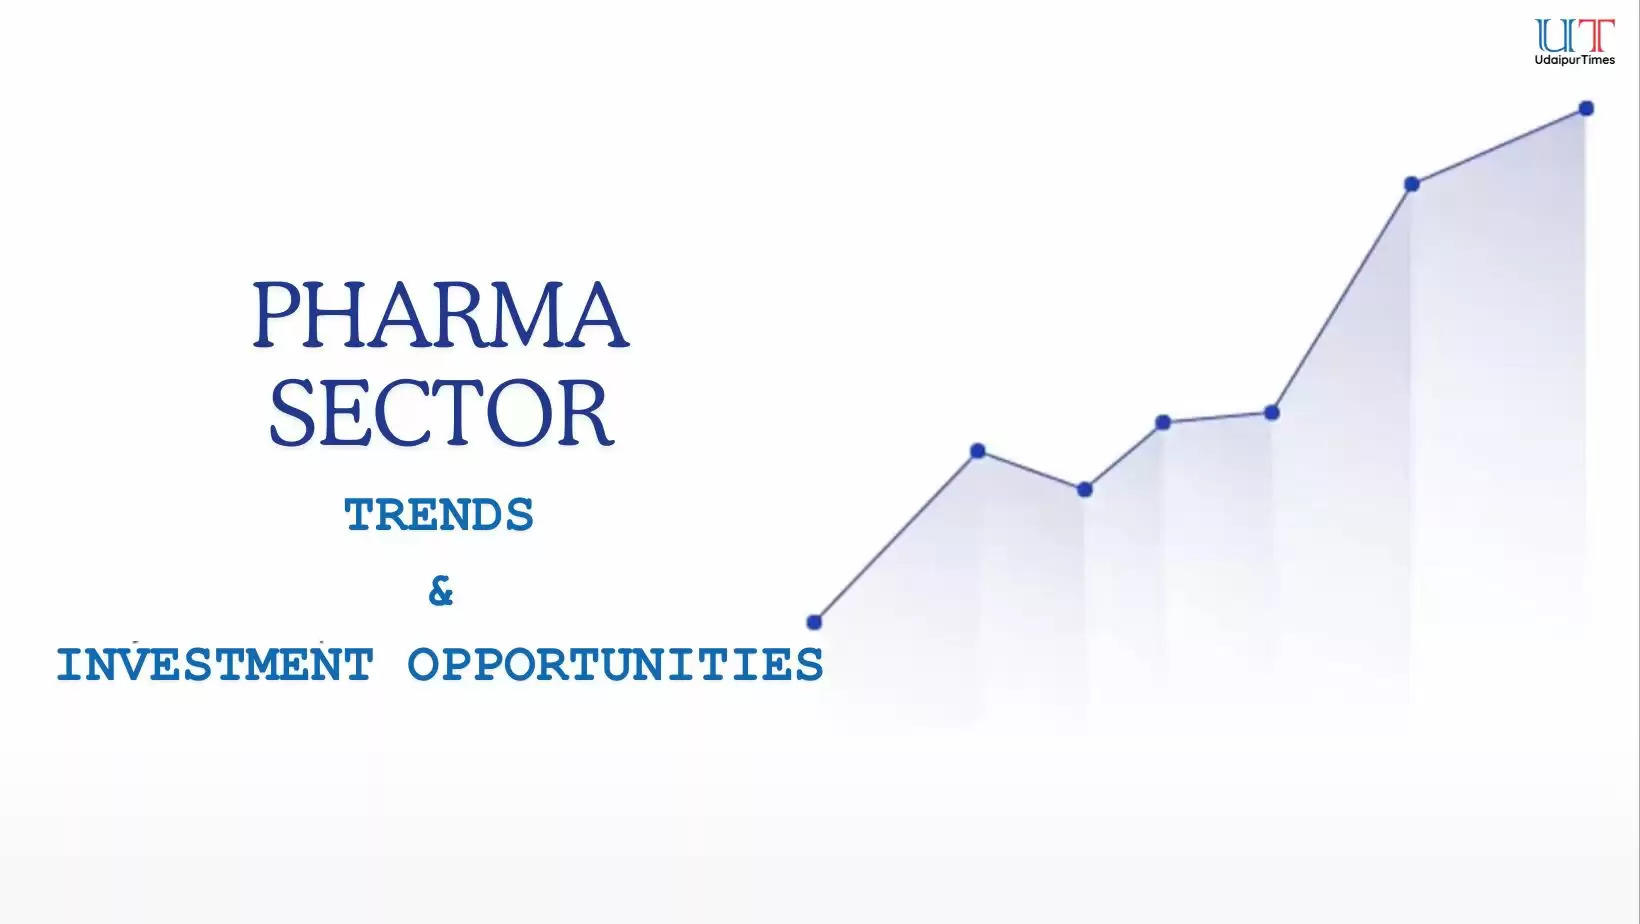 Pharma Sector Analysis for India Where are the Investment Opportunities and What is the Trend